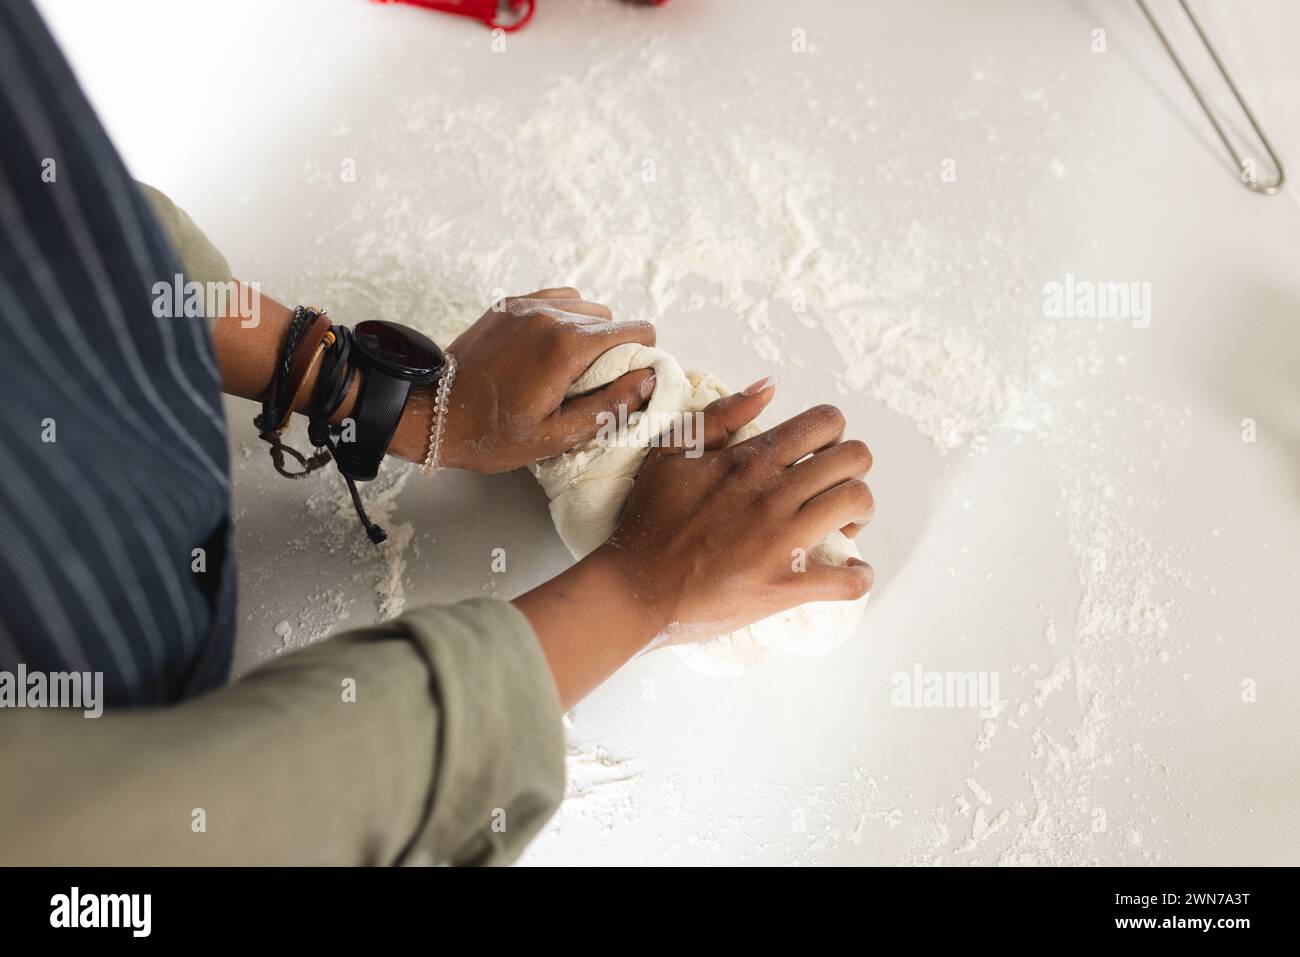 Hands knead dough on a flour-dusted surface with copy space, revealing a baking process Stock Photo